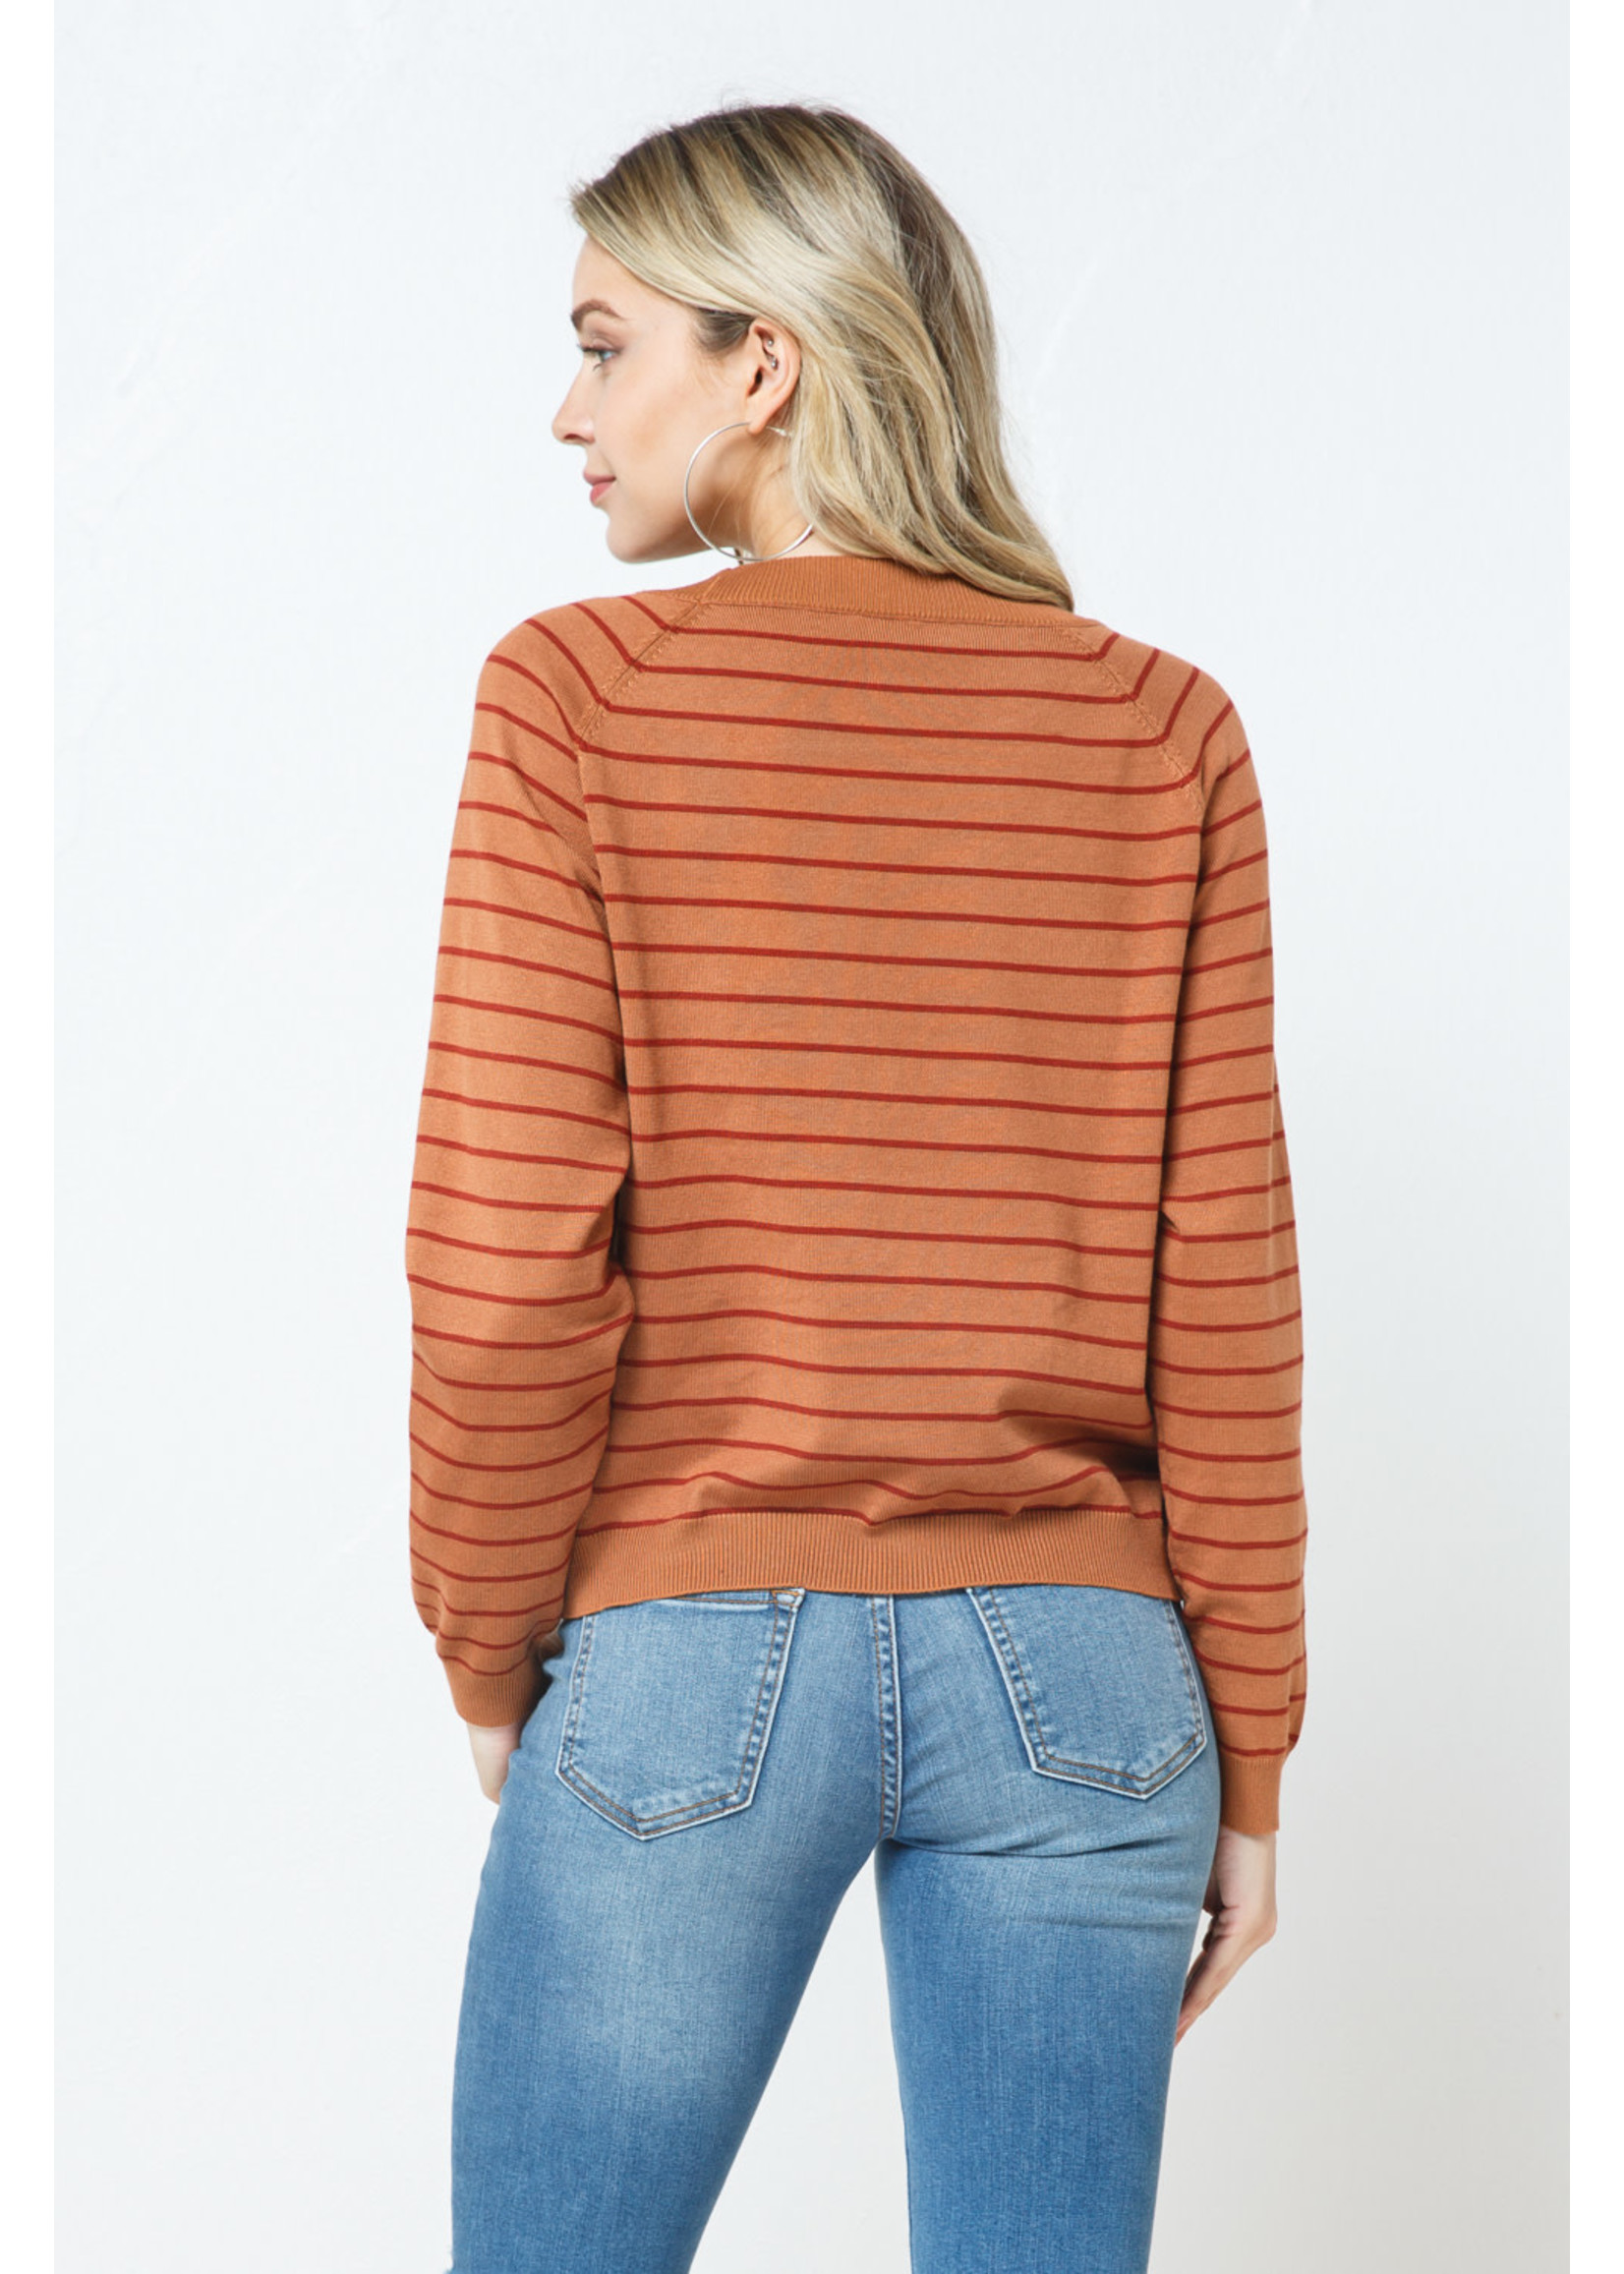 Cozy Co. Pin Striped Knit Crew Neck Pullover Sweater- Rust